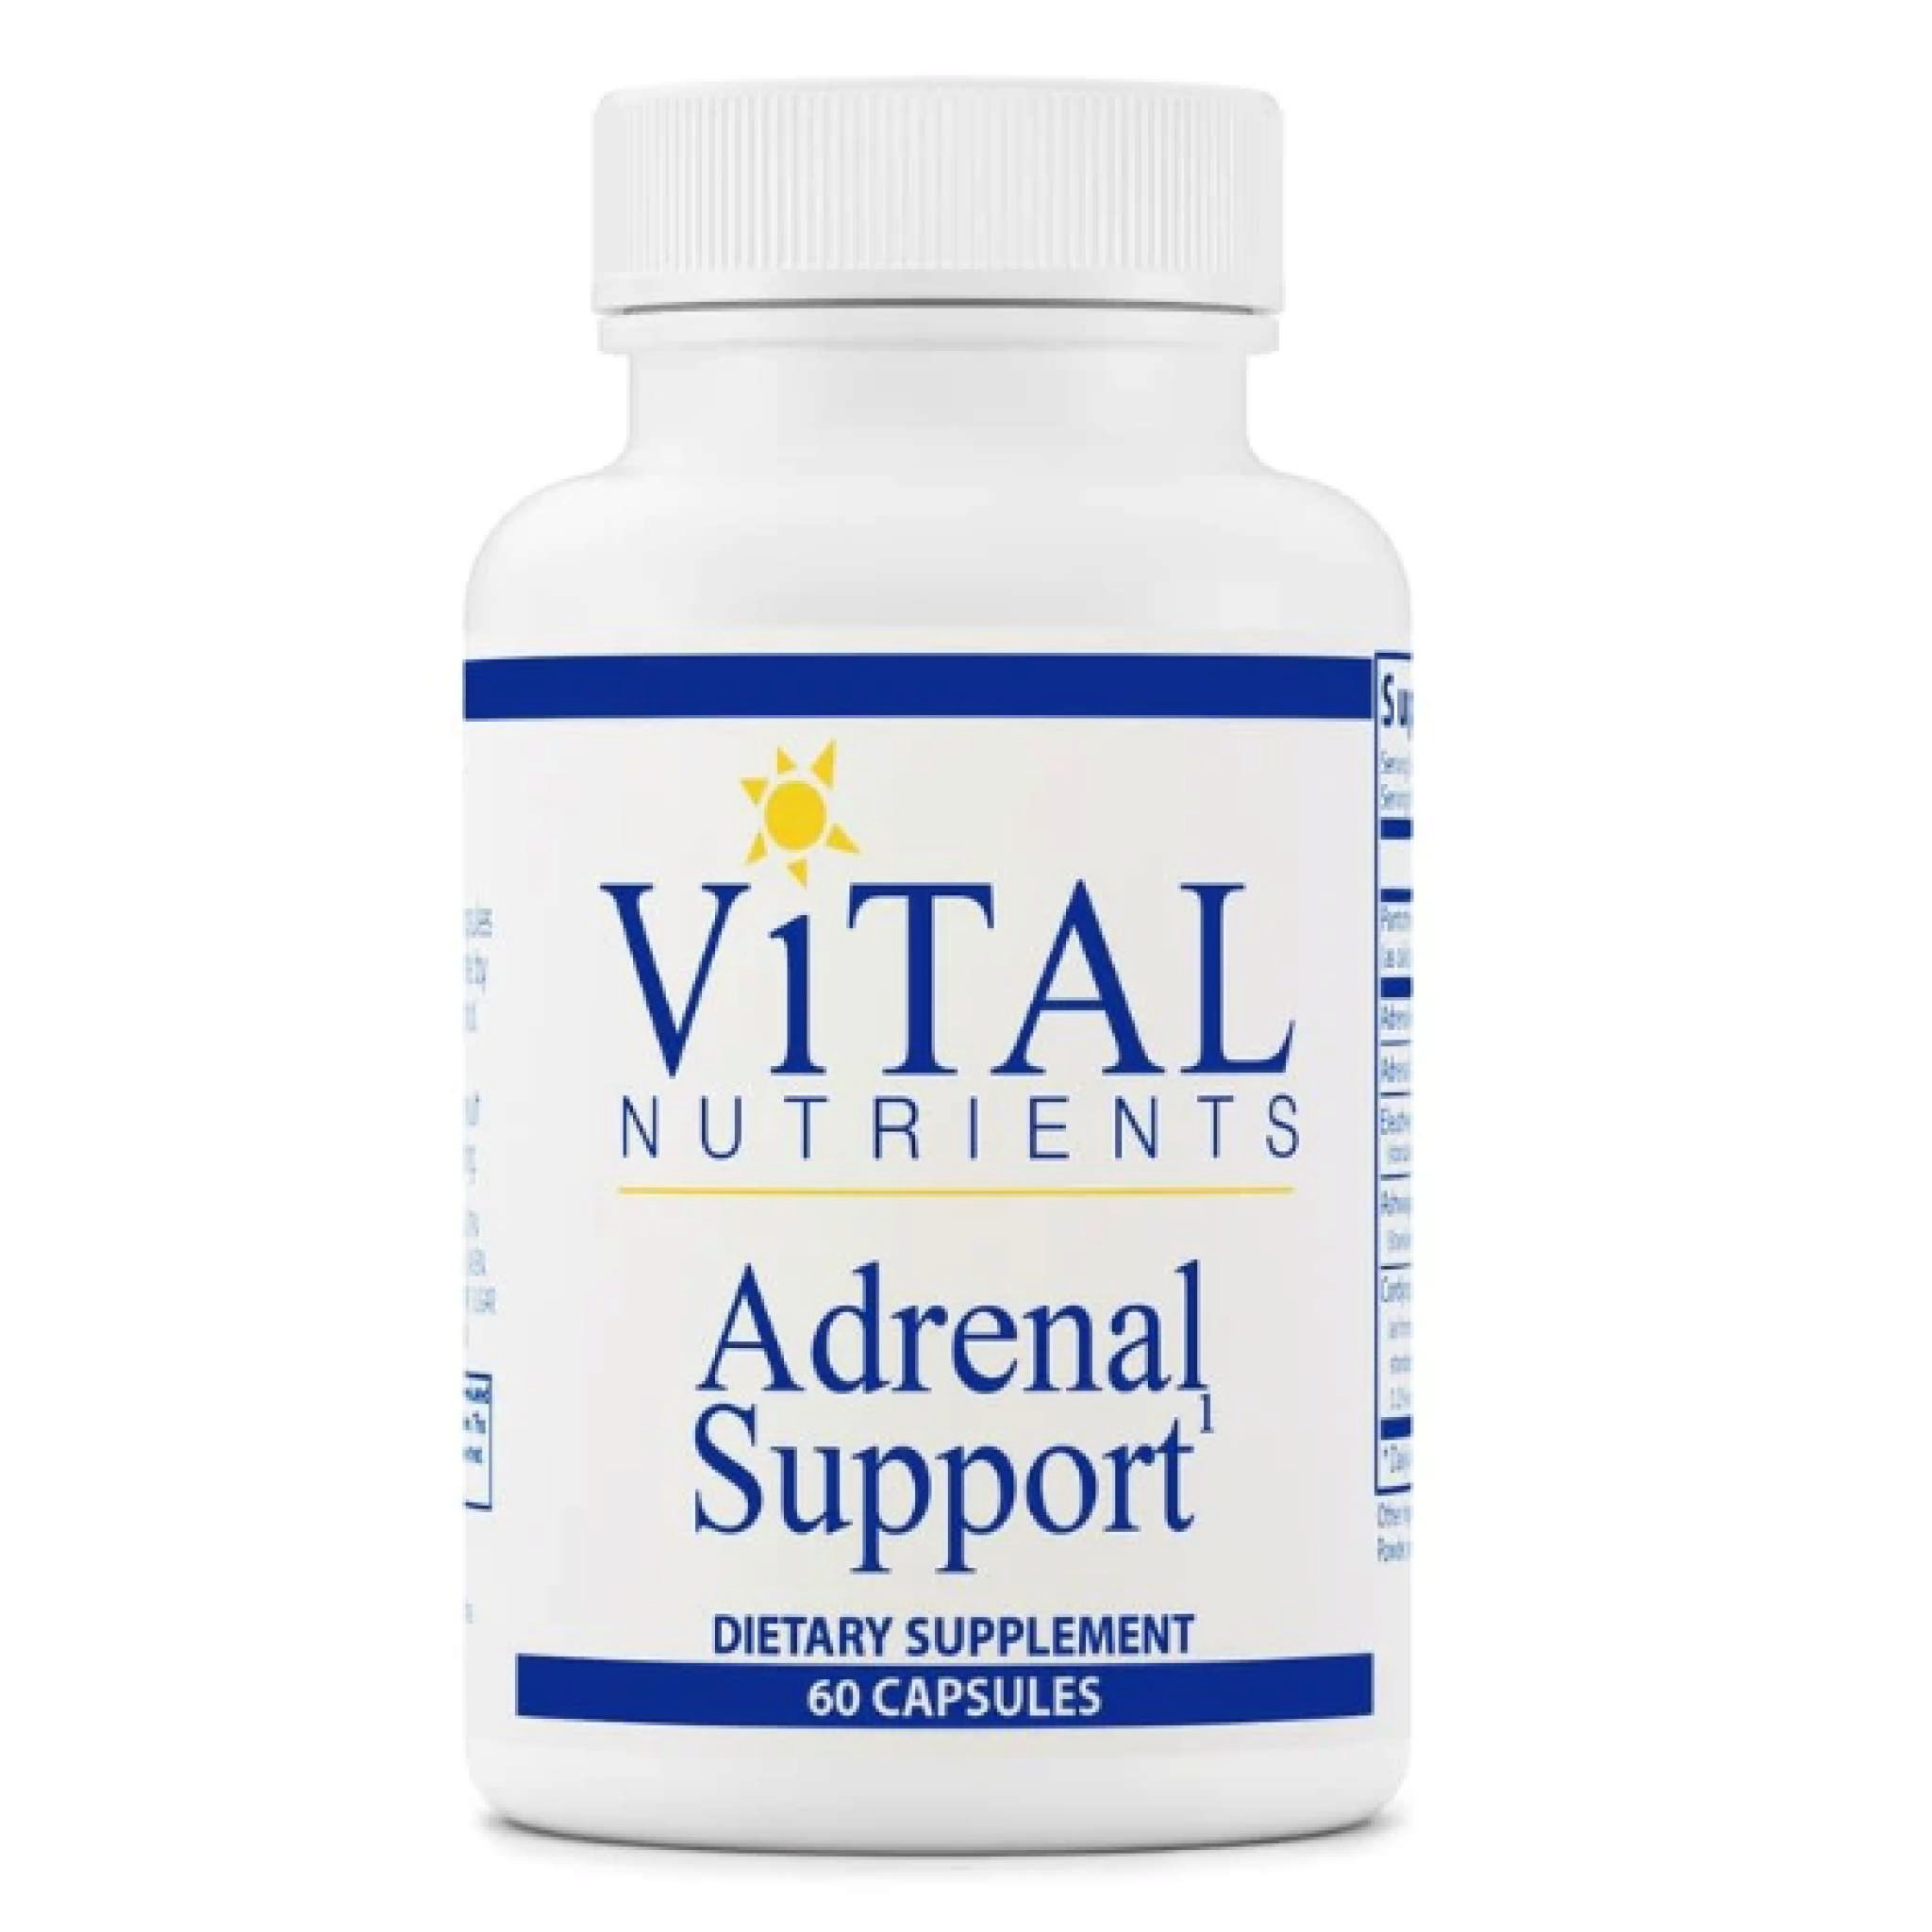 Vital Nutrients - Adrenal Support